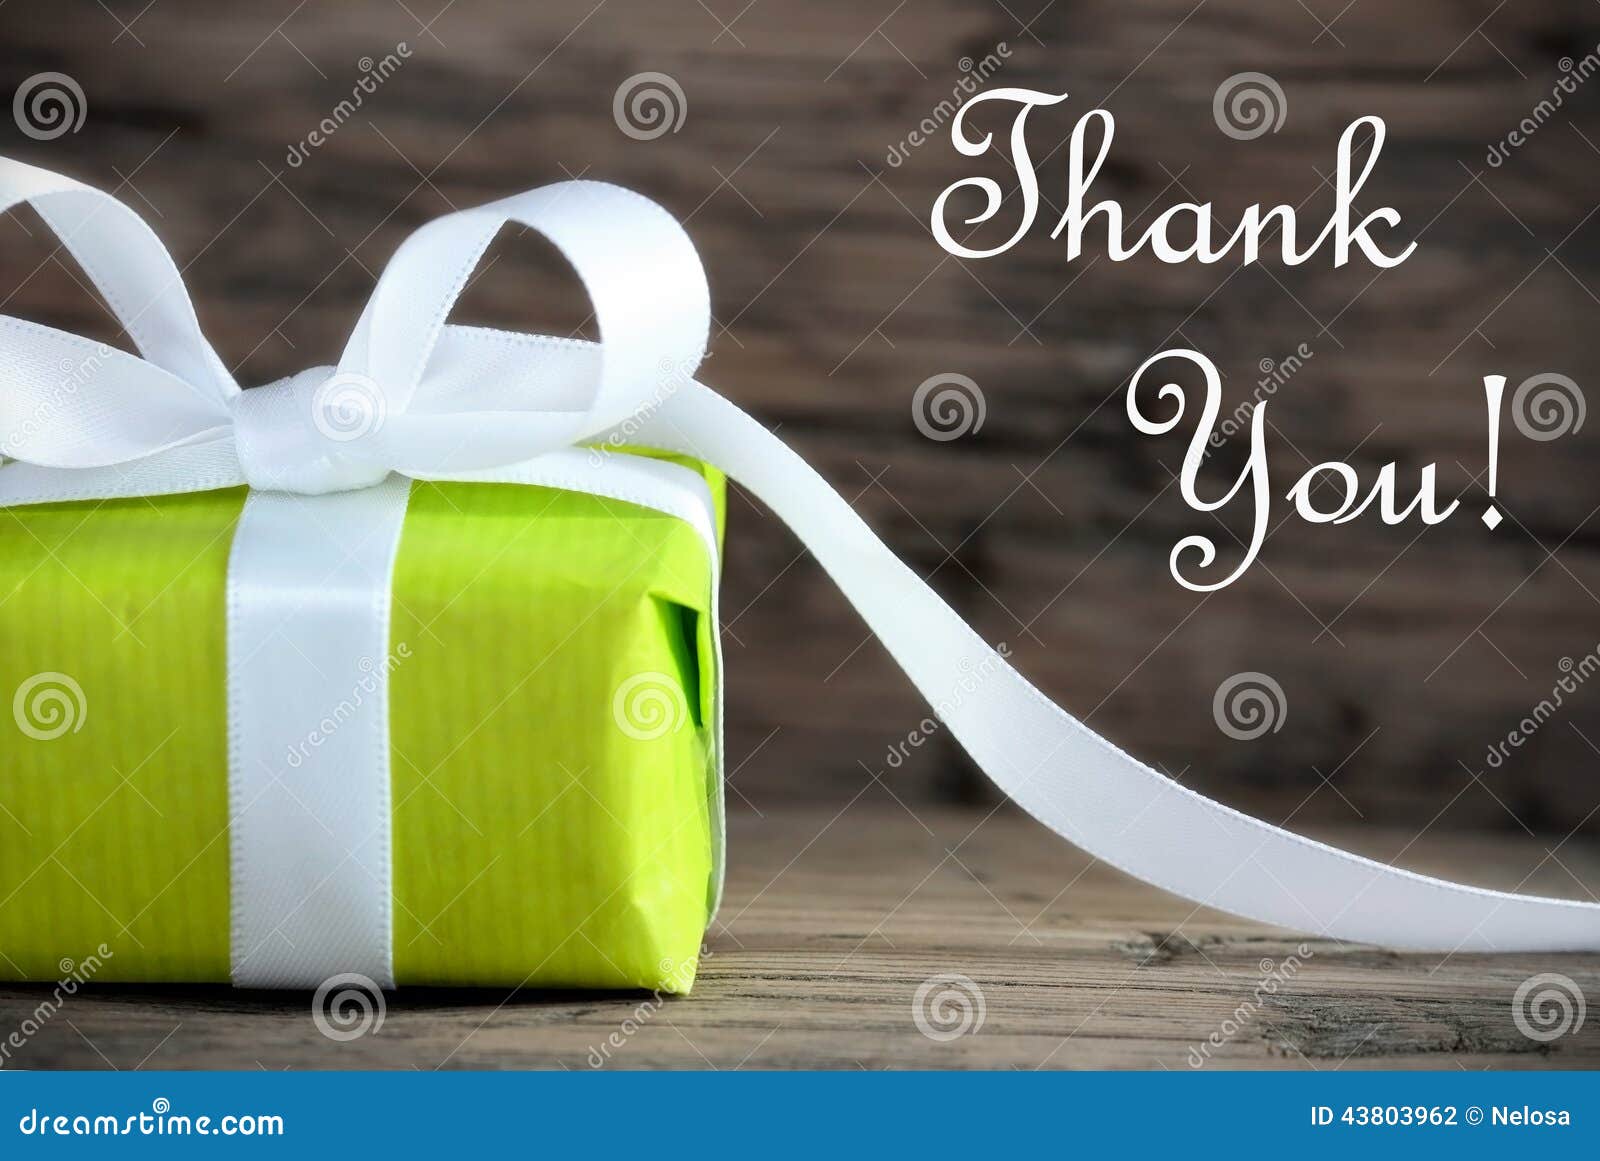 green present with thank you text